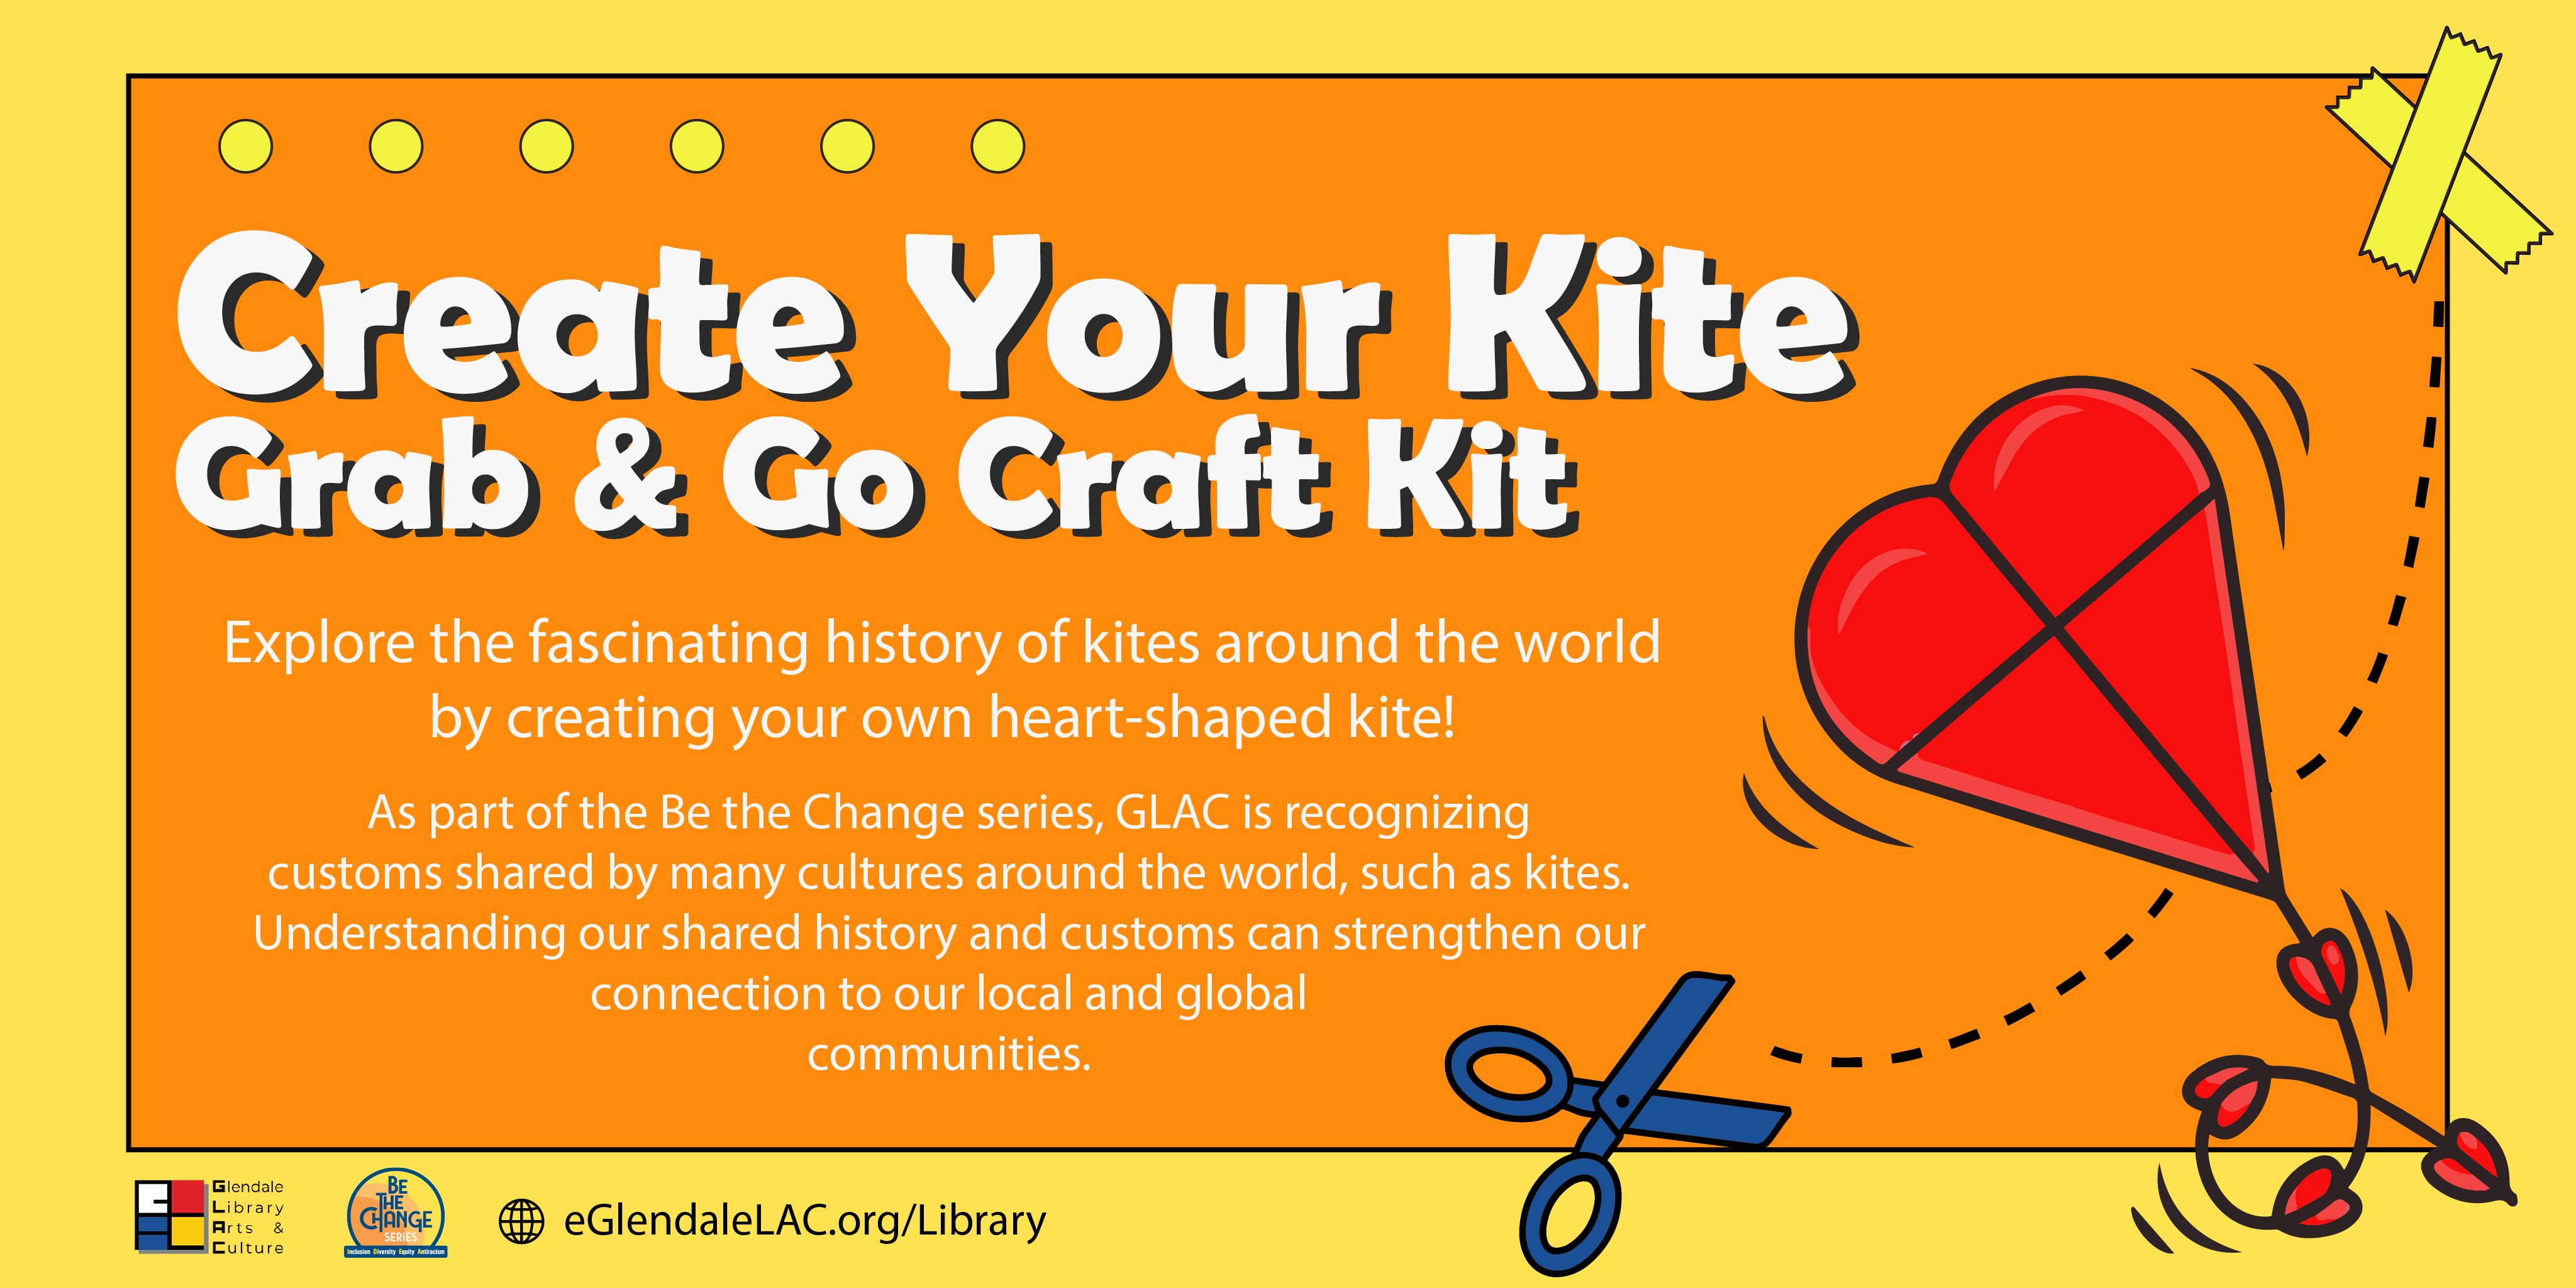 Brand Library on X: Visit the Brand Library today and get your own Kite  Kit! Explore the fascinating history of kites around the world by creating  your own heart-shaped kite! ❤️🪁  /